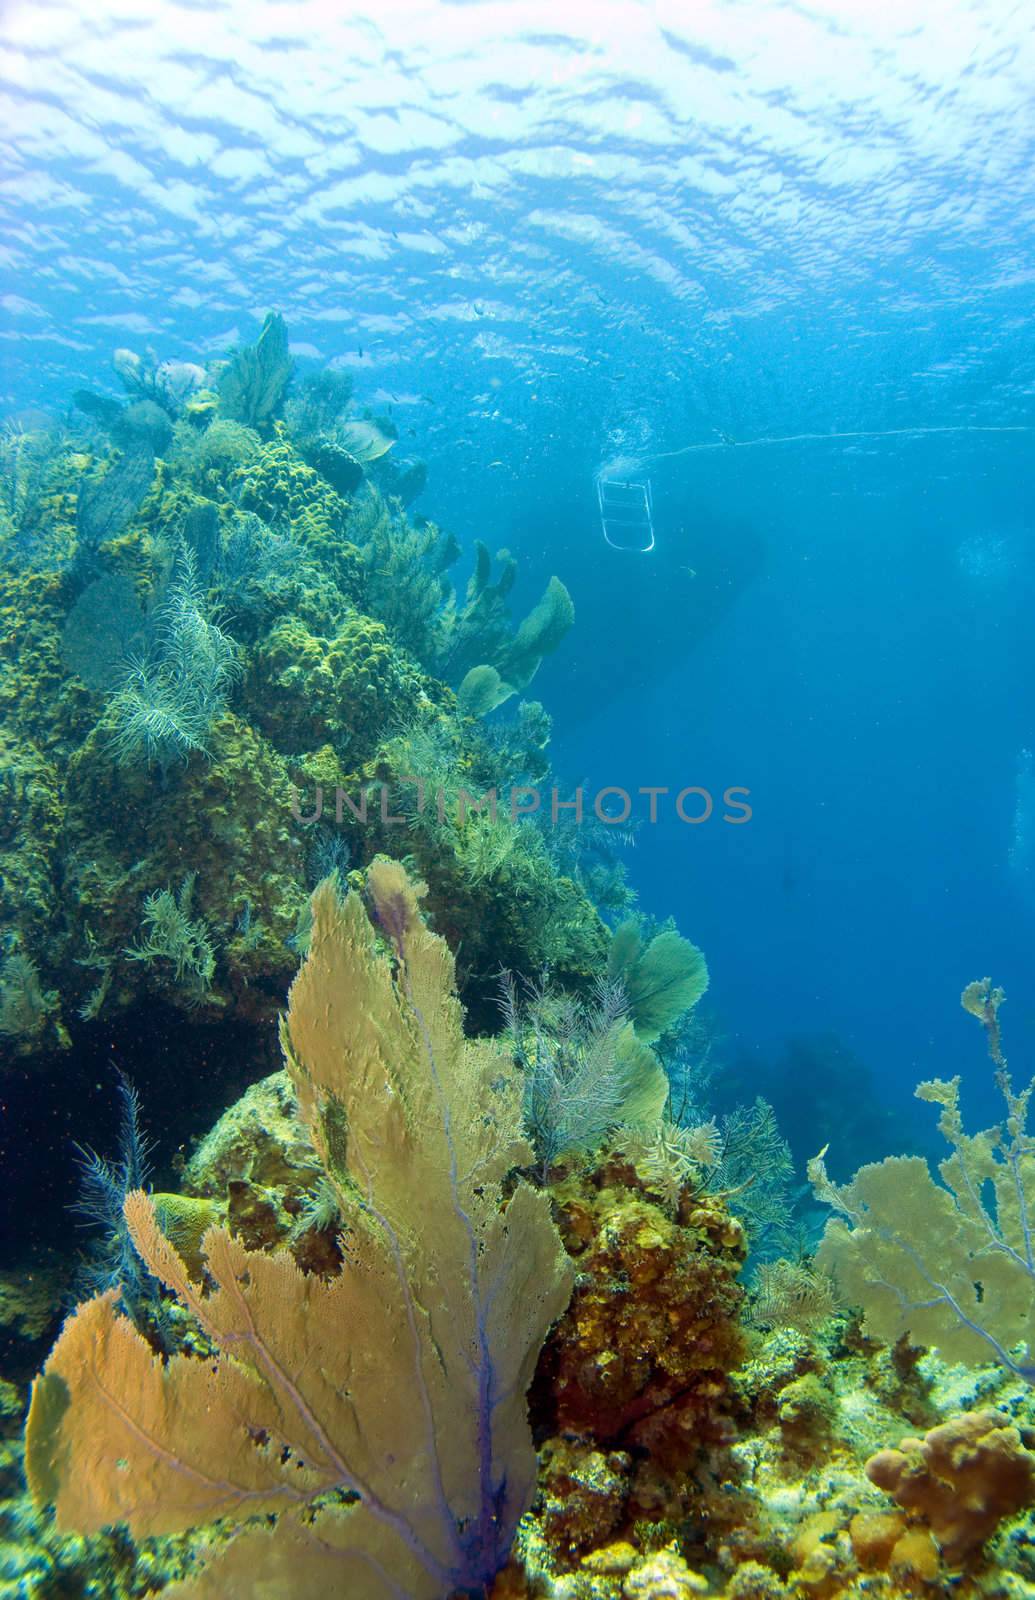 Cayman Brac Reef with Boat by KevinPanizza